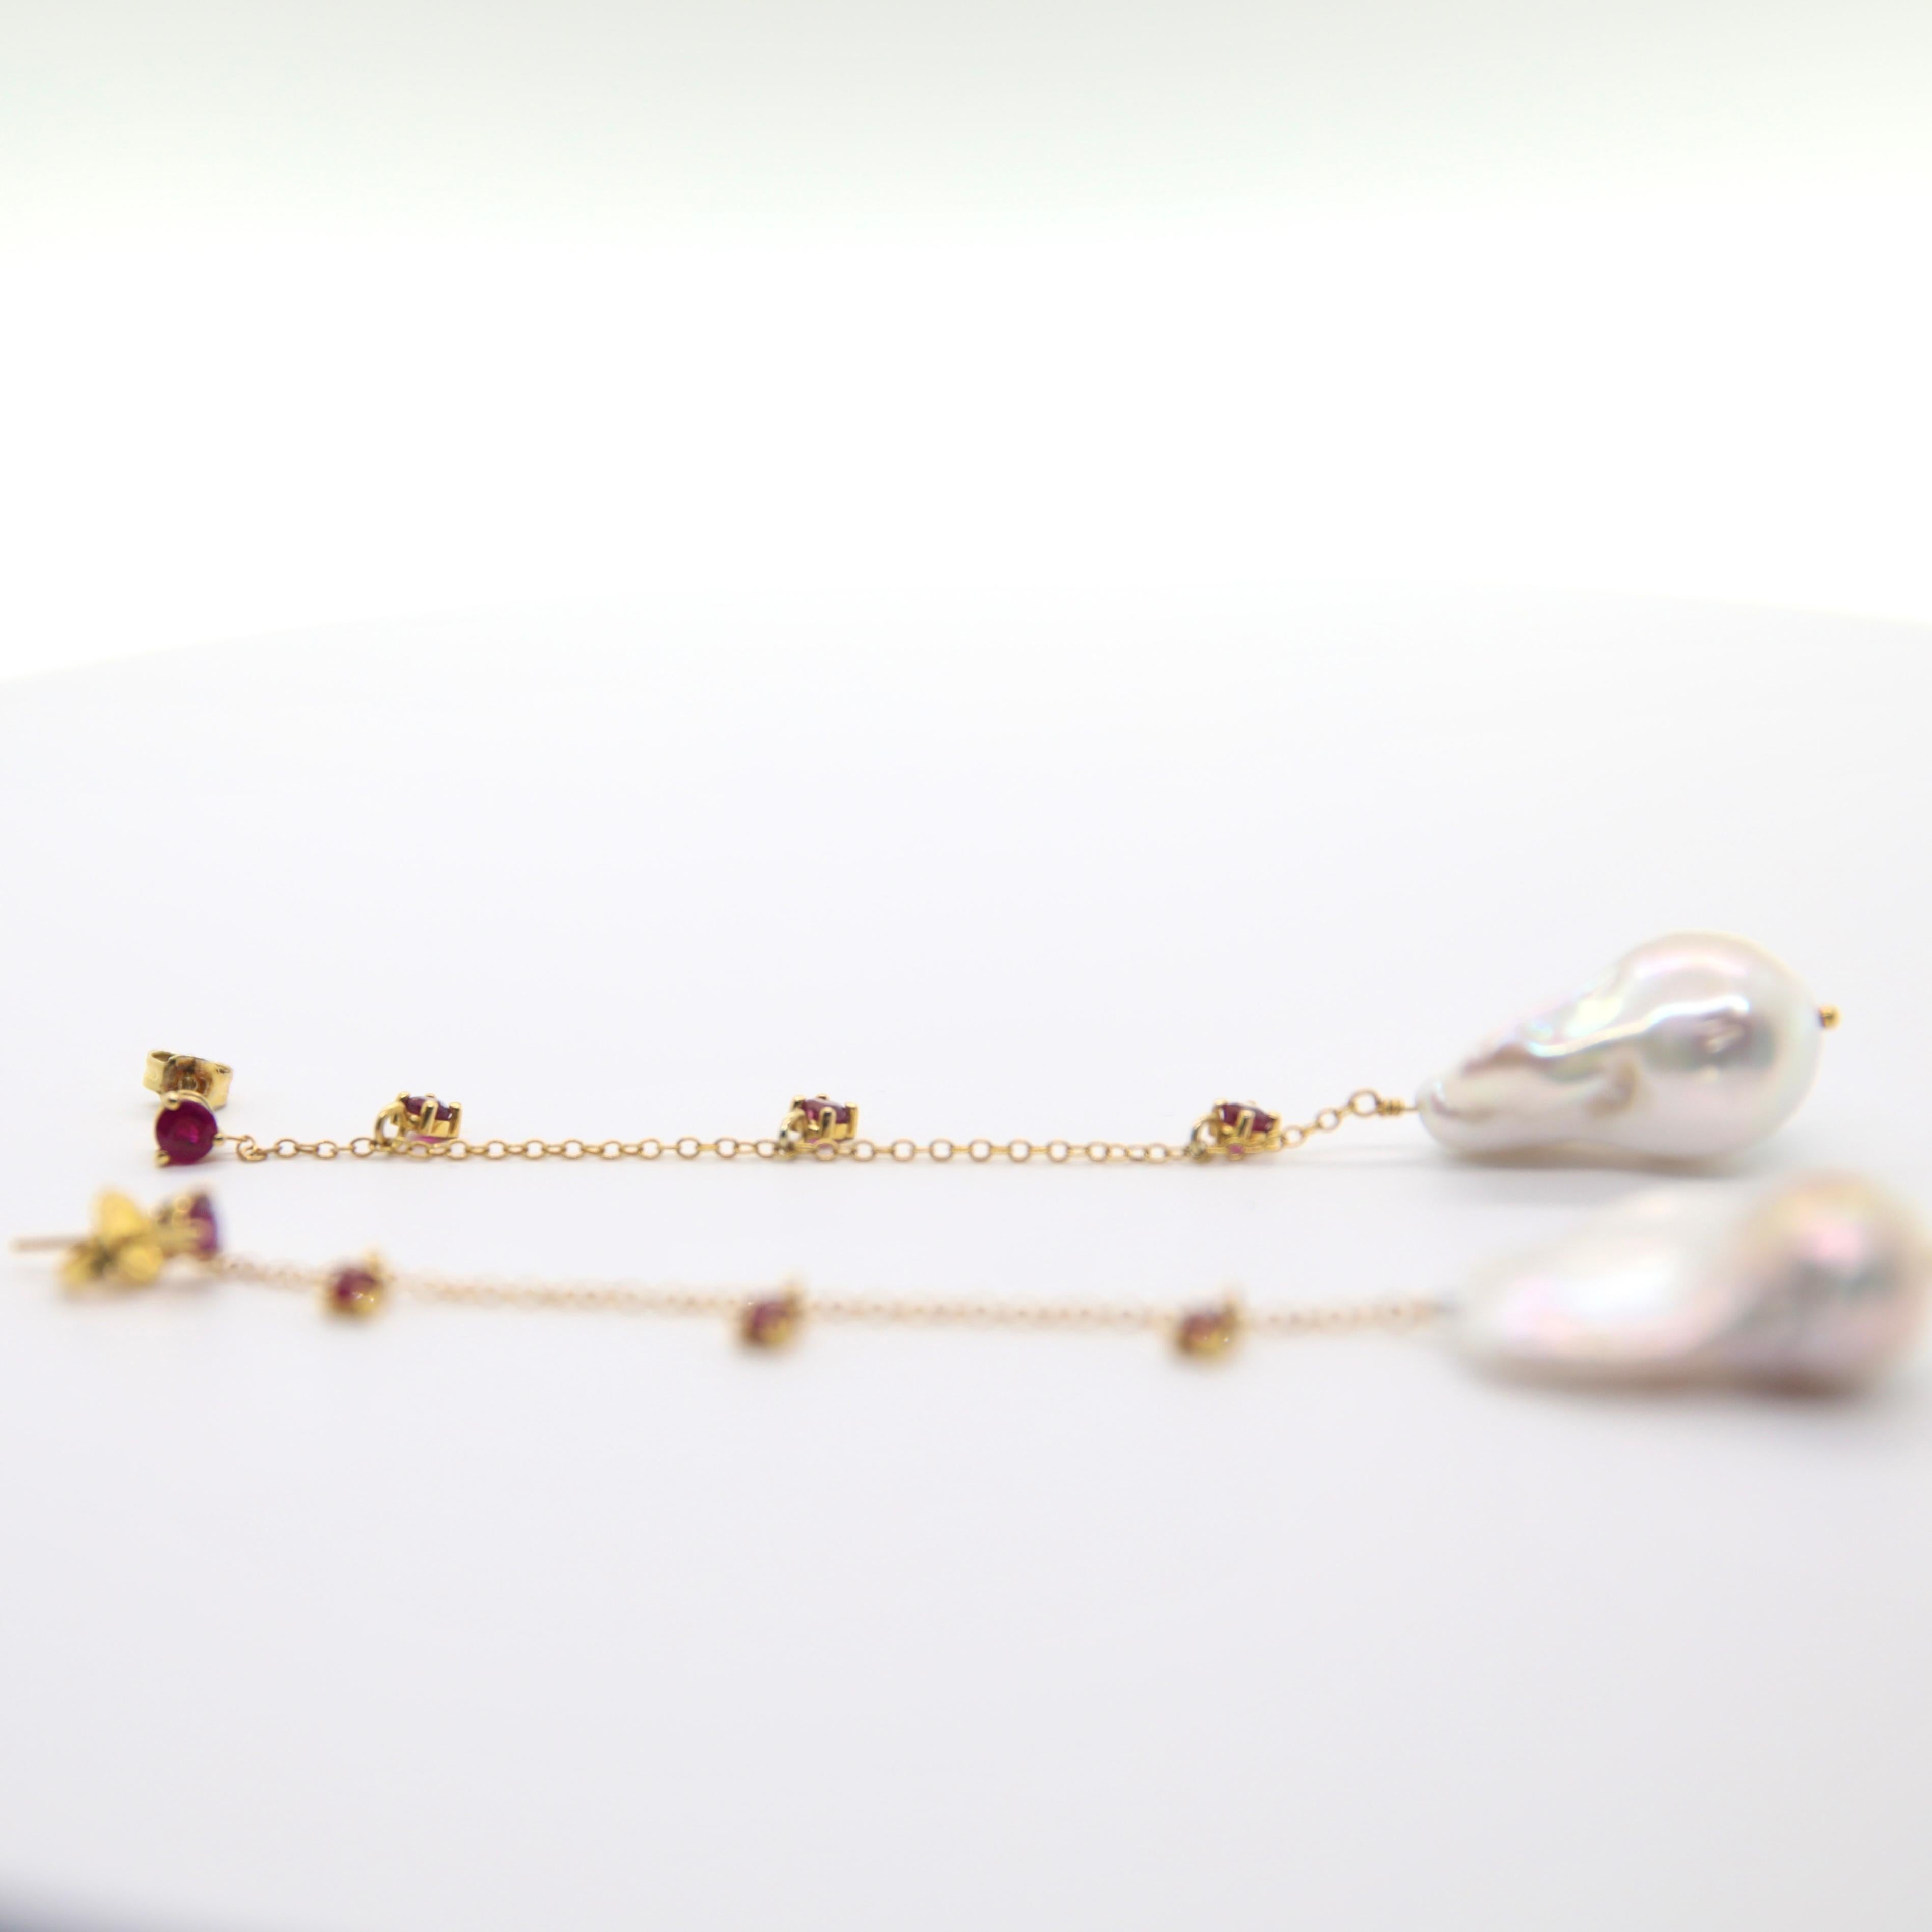 Ruby stud earring- in 14k yellow gold prong is connected with a 14k yellow gold cable chain.

The chain has 3 round rubies on each side, set in a 14k yellow gold prong setting.

*Fit for special occasions and is lightweight/easy for every day